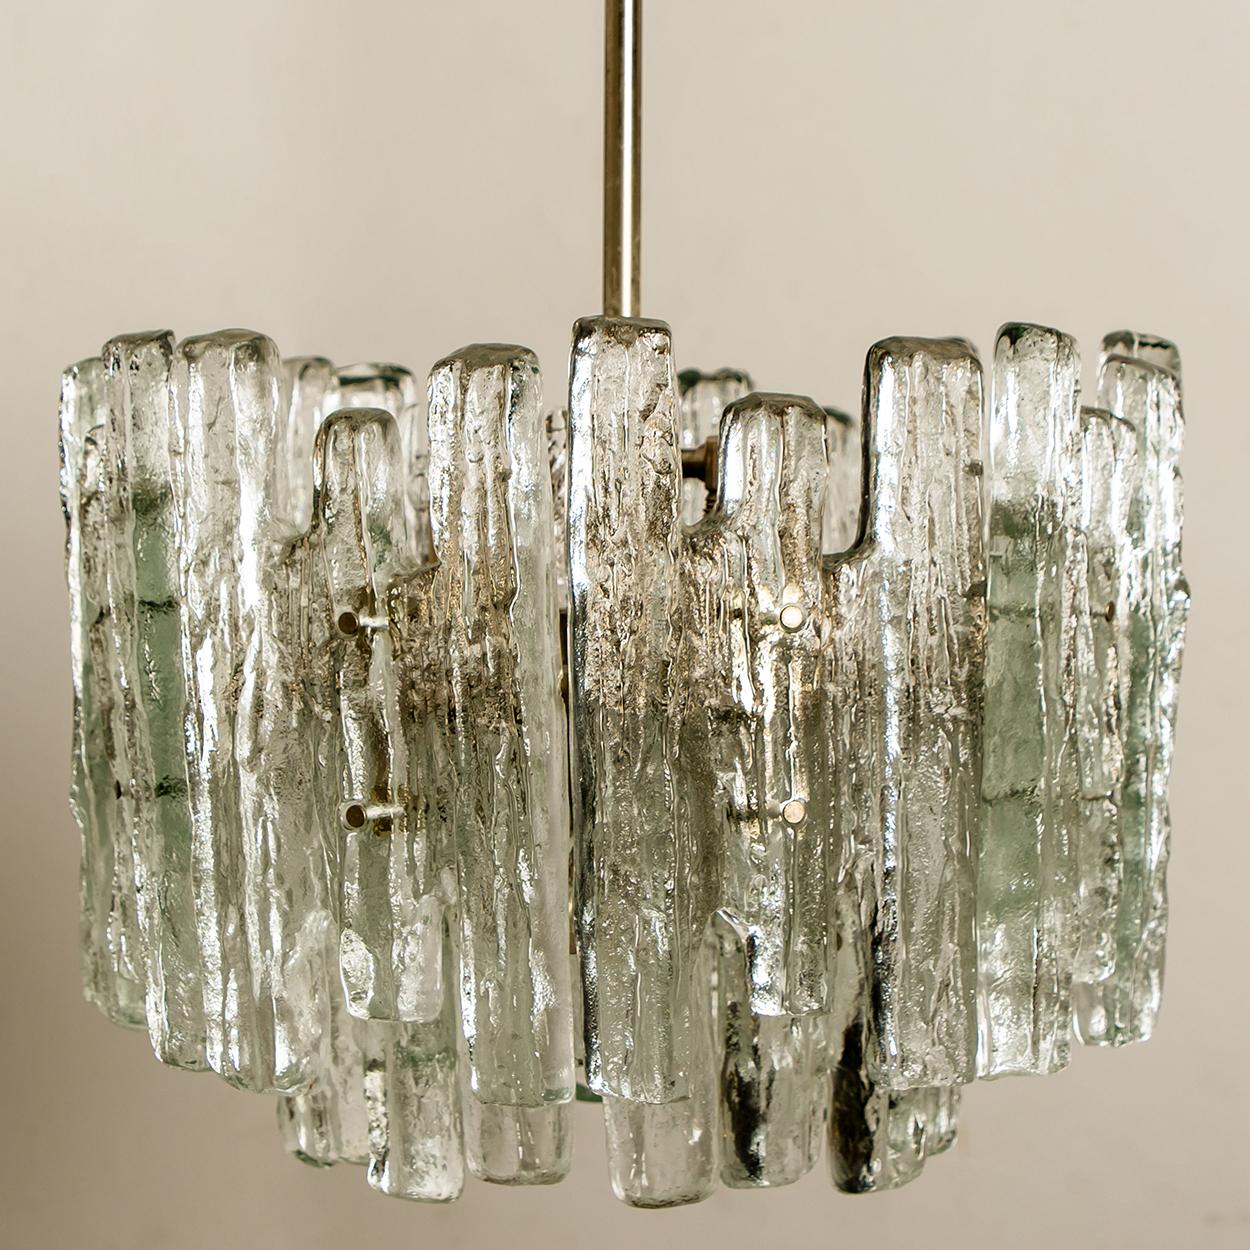 Pair of Large Modern Three-Tiered Chrome Ice Glass Chandeliers by J.T. Kalmar For Sale 5